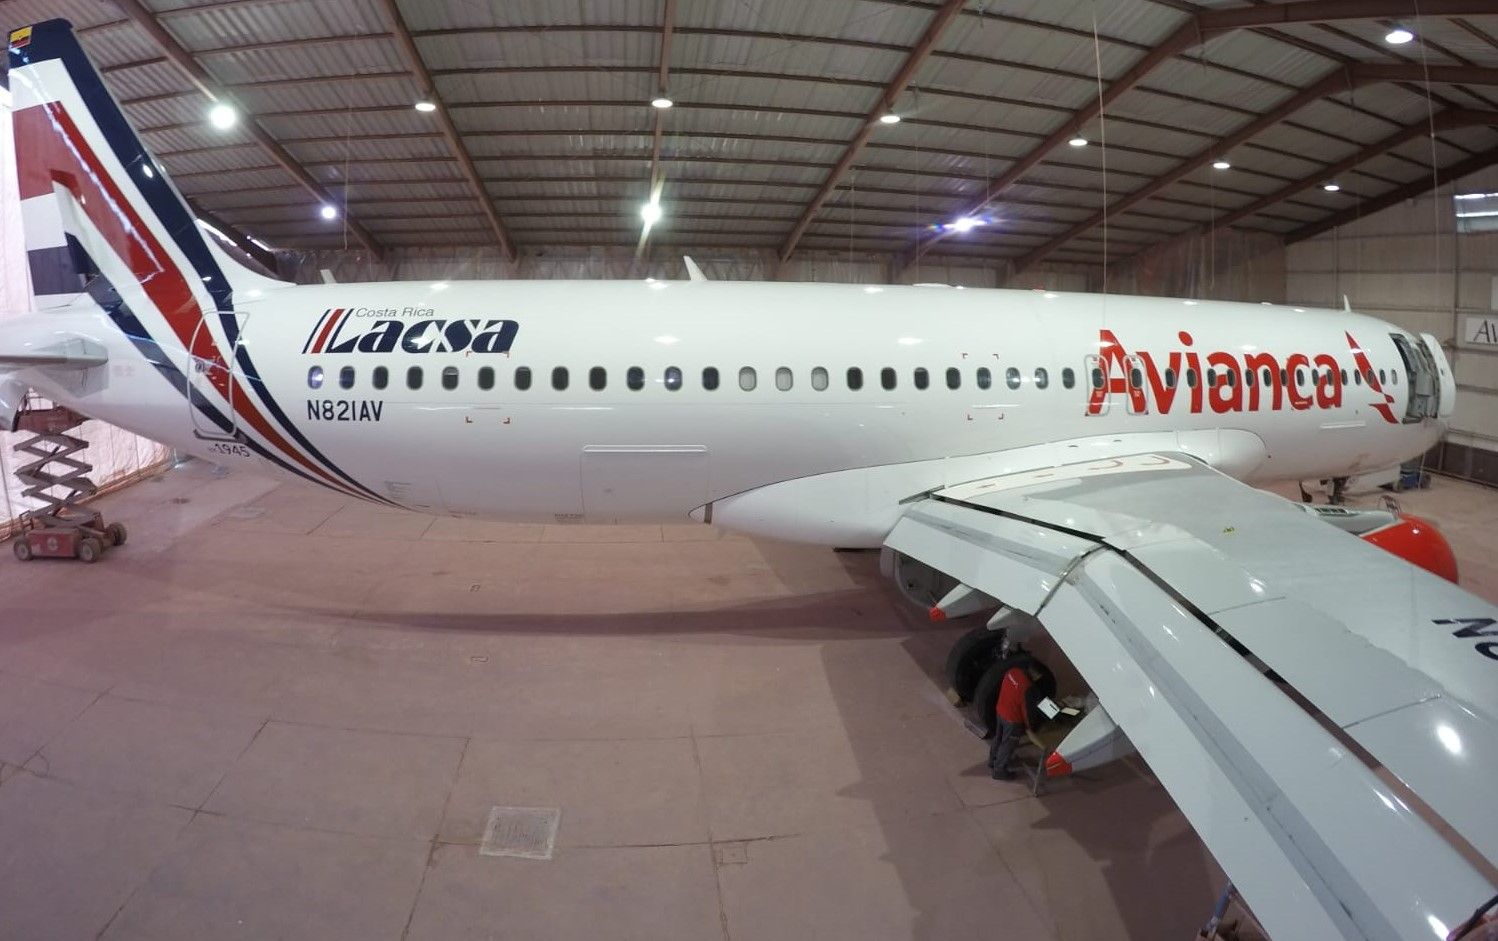 An Avianca Airbus A320 with a LACSA livery